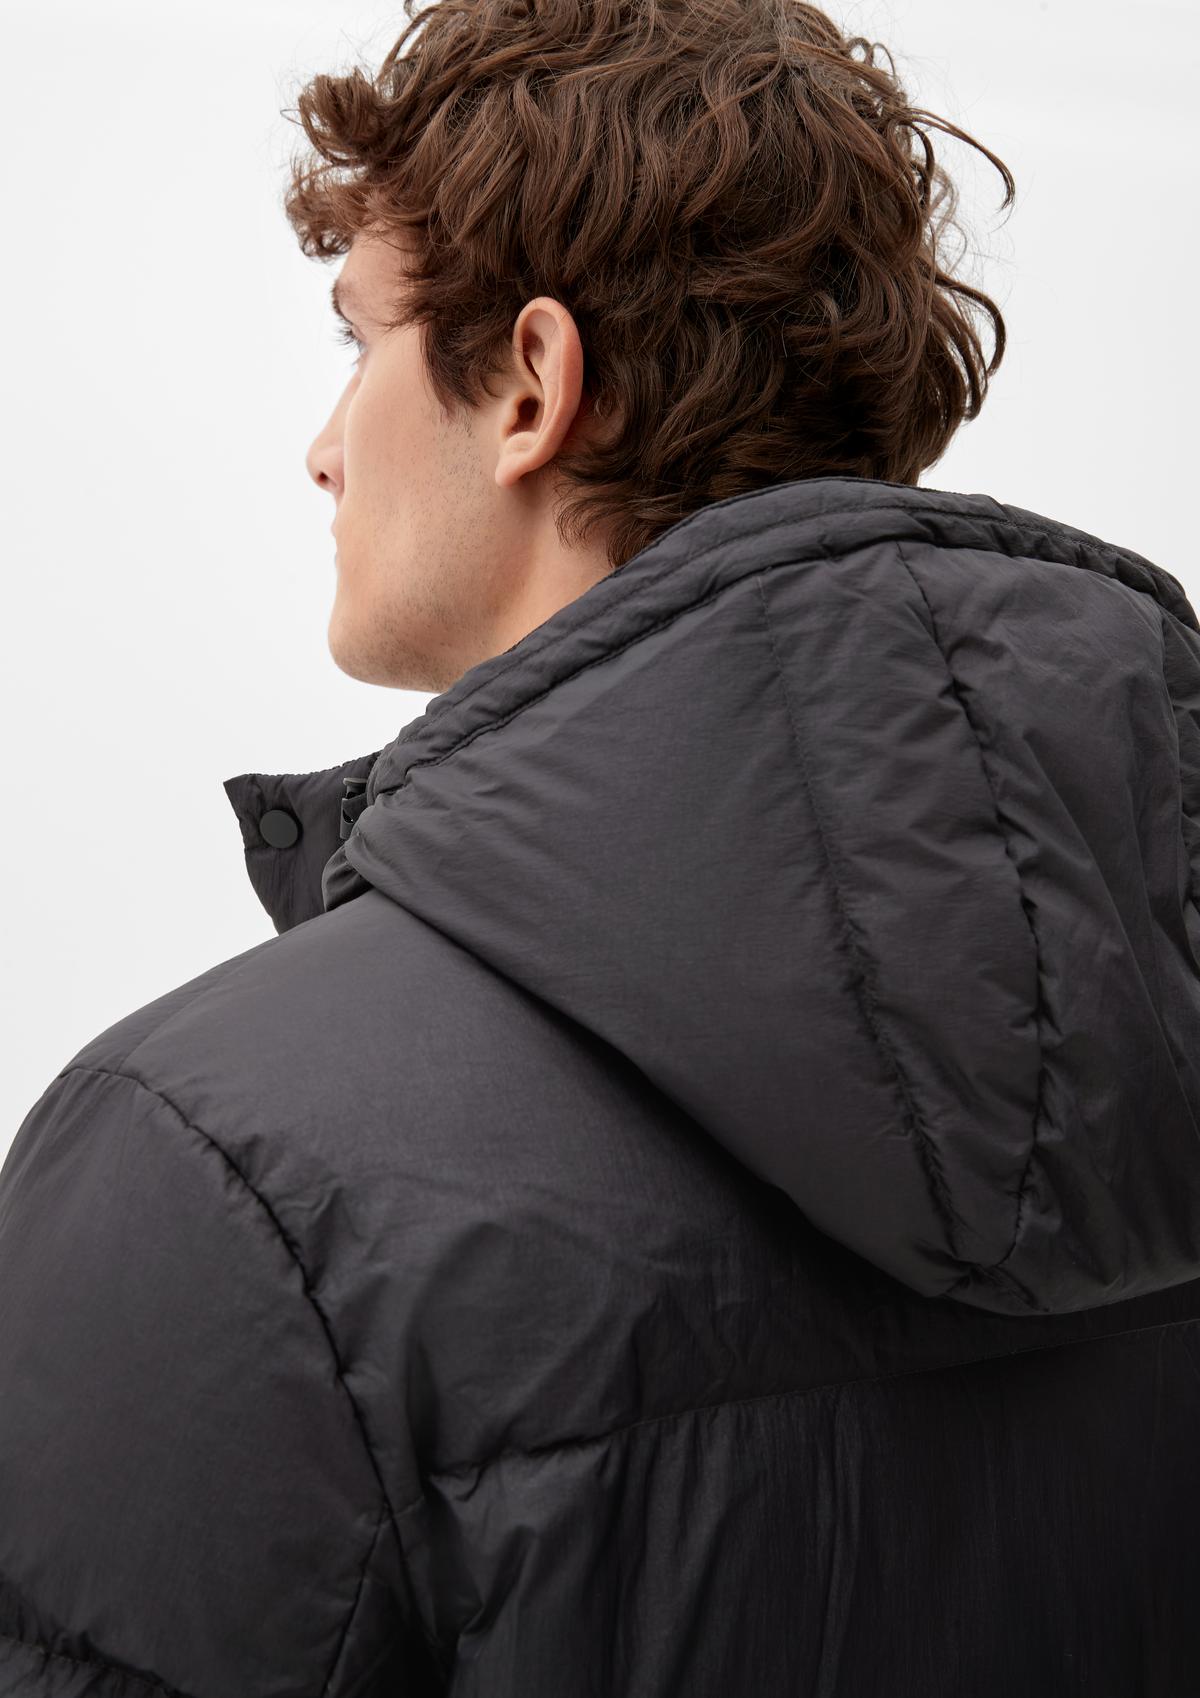 s.Oliver Down jacket with a hood